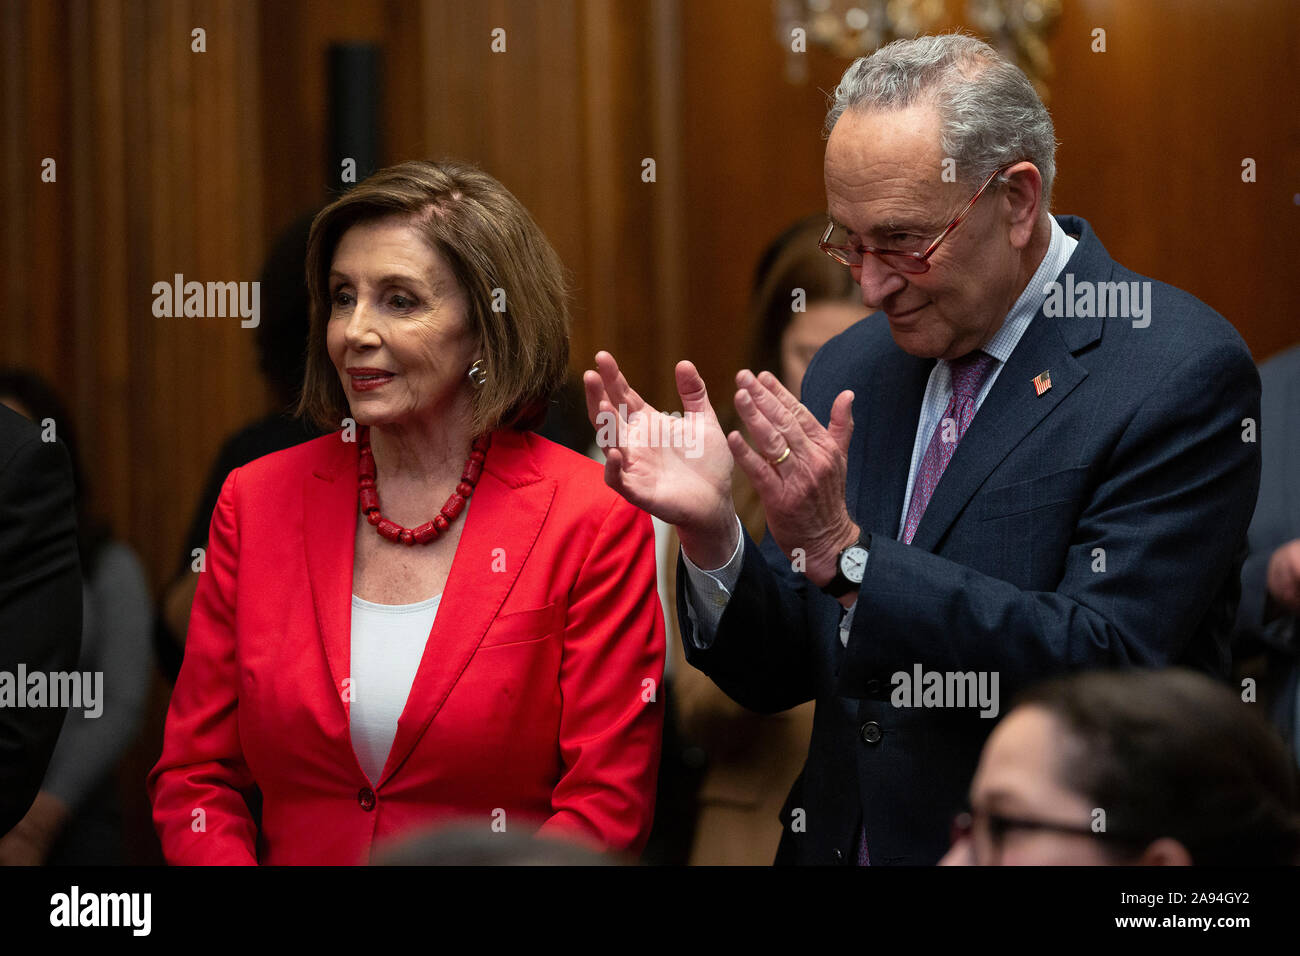 Speaker of the United States House of Representatives Nancy Pelosi (Democrat of California) and United States Senate Minority Leader Chuck Schumer (Democrat of New York), joined by other Democratic lawmakers, attend a press conference on the Deferred Action for Childhood Arrivals program on Capitol Hill in Washington, DC, U.S. on Tuesday, November 12, 2019. The Supreme Court is currently hearing a case that will determine the legality and future of the DACA program. Credit: Stefani Reynolds/CNP /MediaPunch Stock Photo